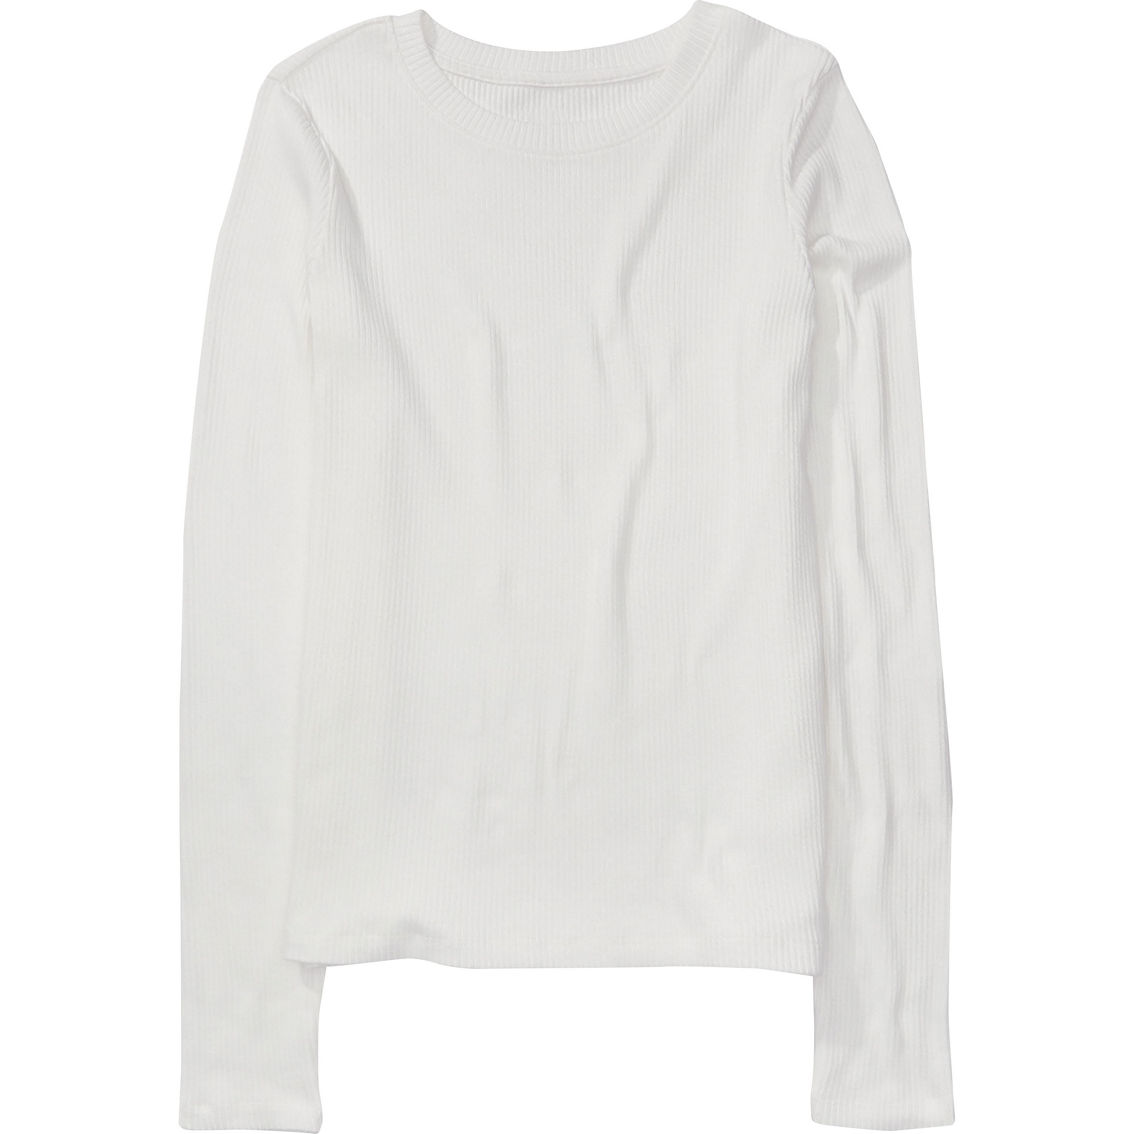 American Eagle Butterplush Crew Neck Tee | Tops | Clothing ...